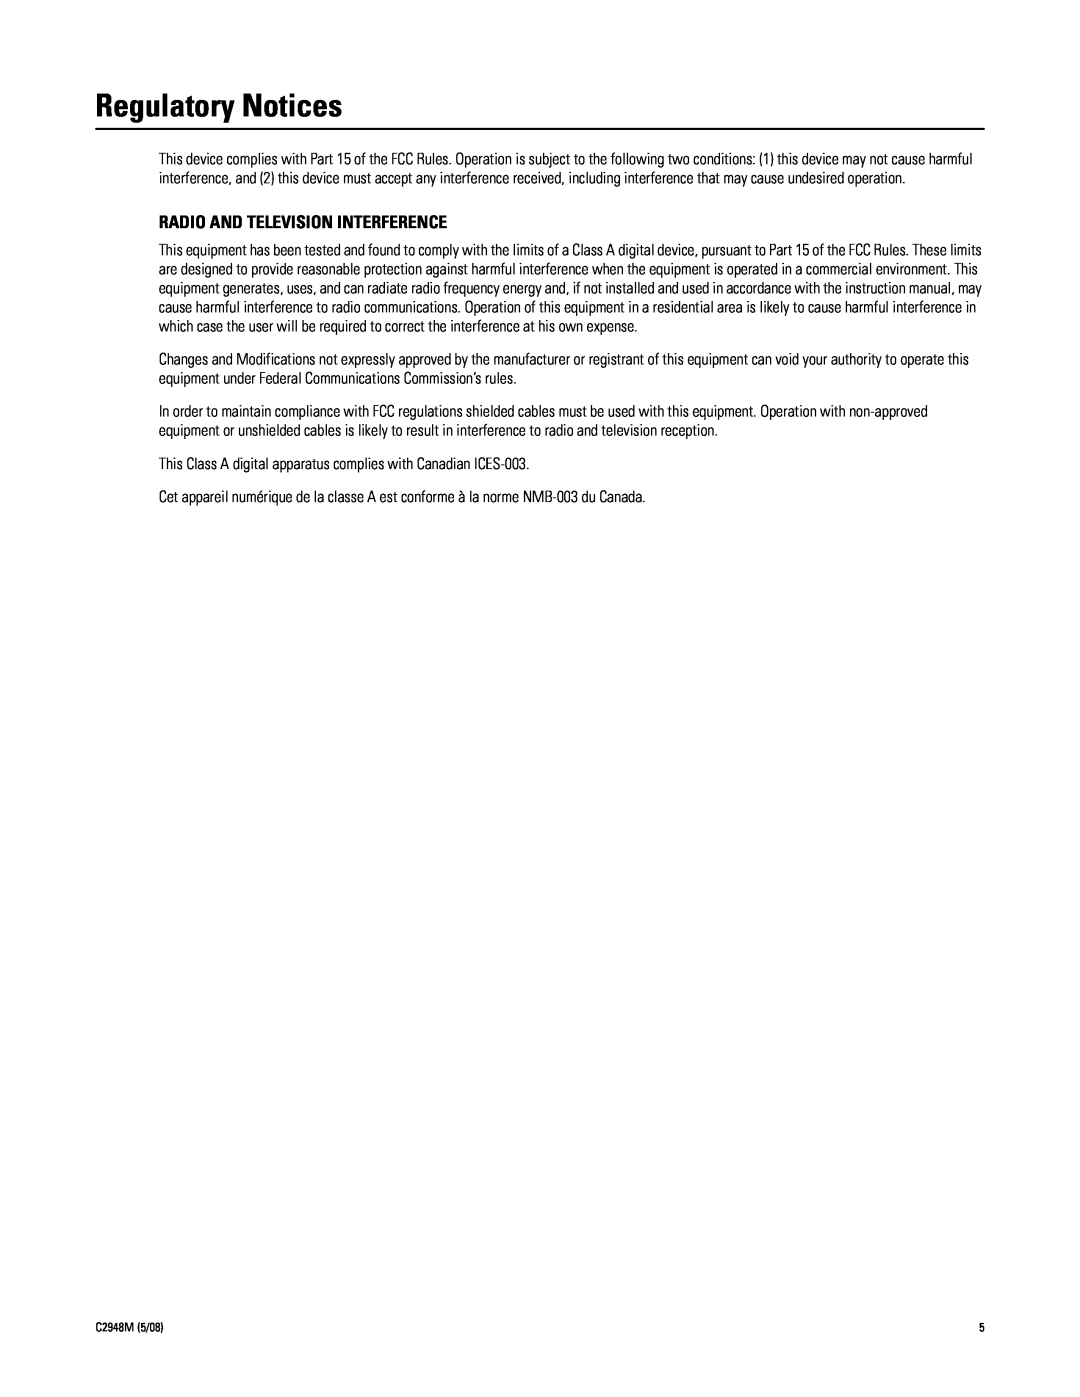 Pelco pmp-cwv9r manual Regulatory Notices, Radio And Television Interference 